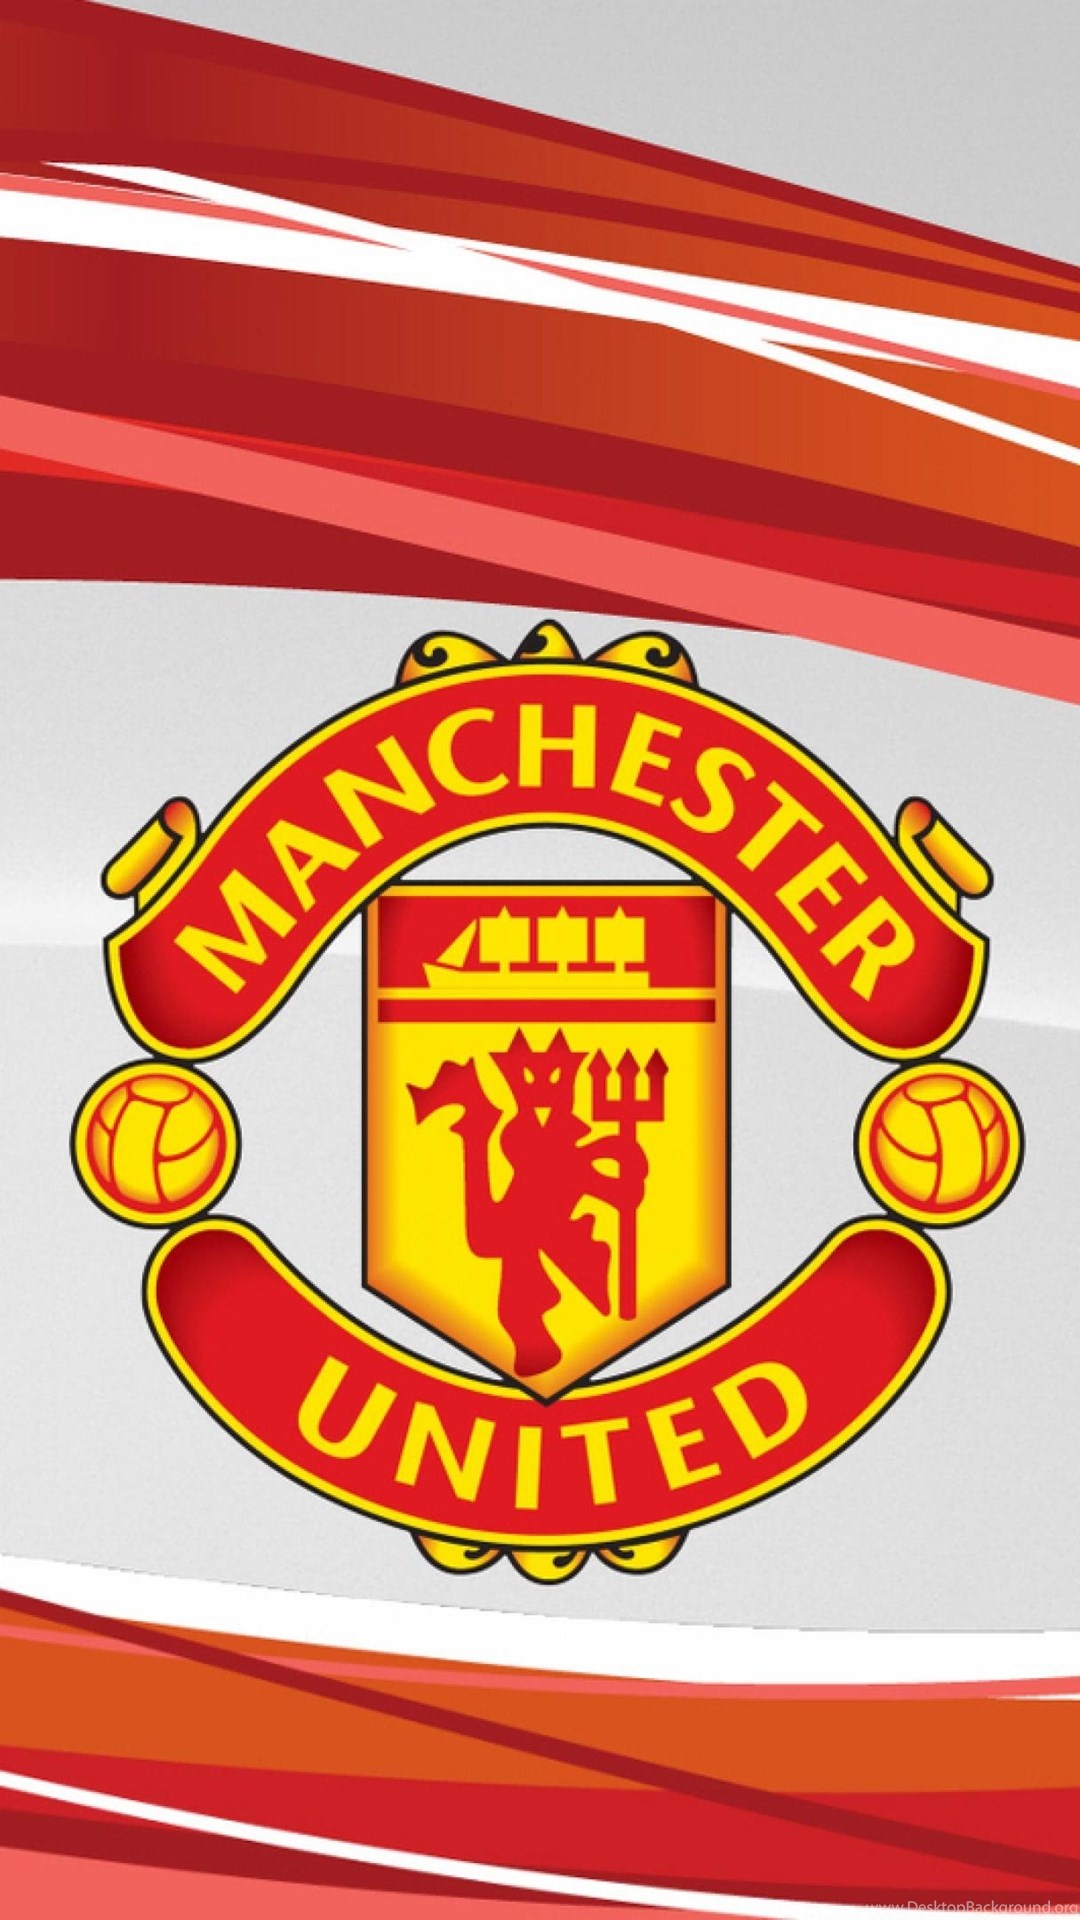 Man Utd desktop wallpapers, Manchester United, Zoey Anderson, 1080x1920 Full HD Phone